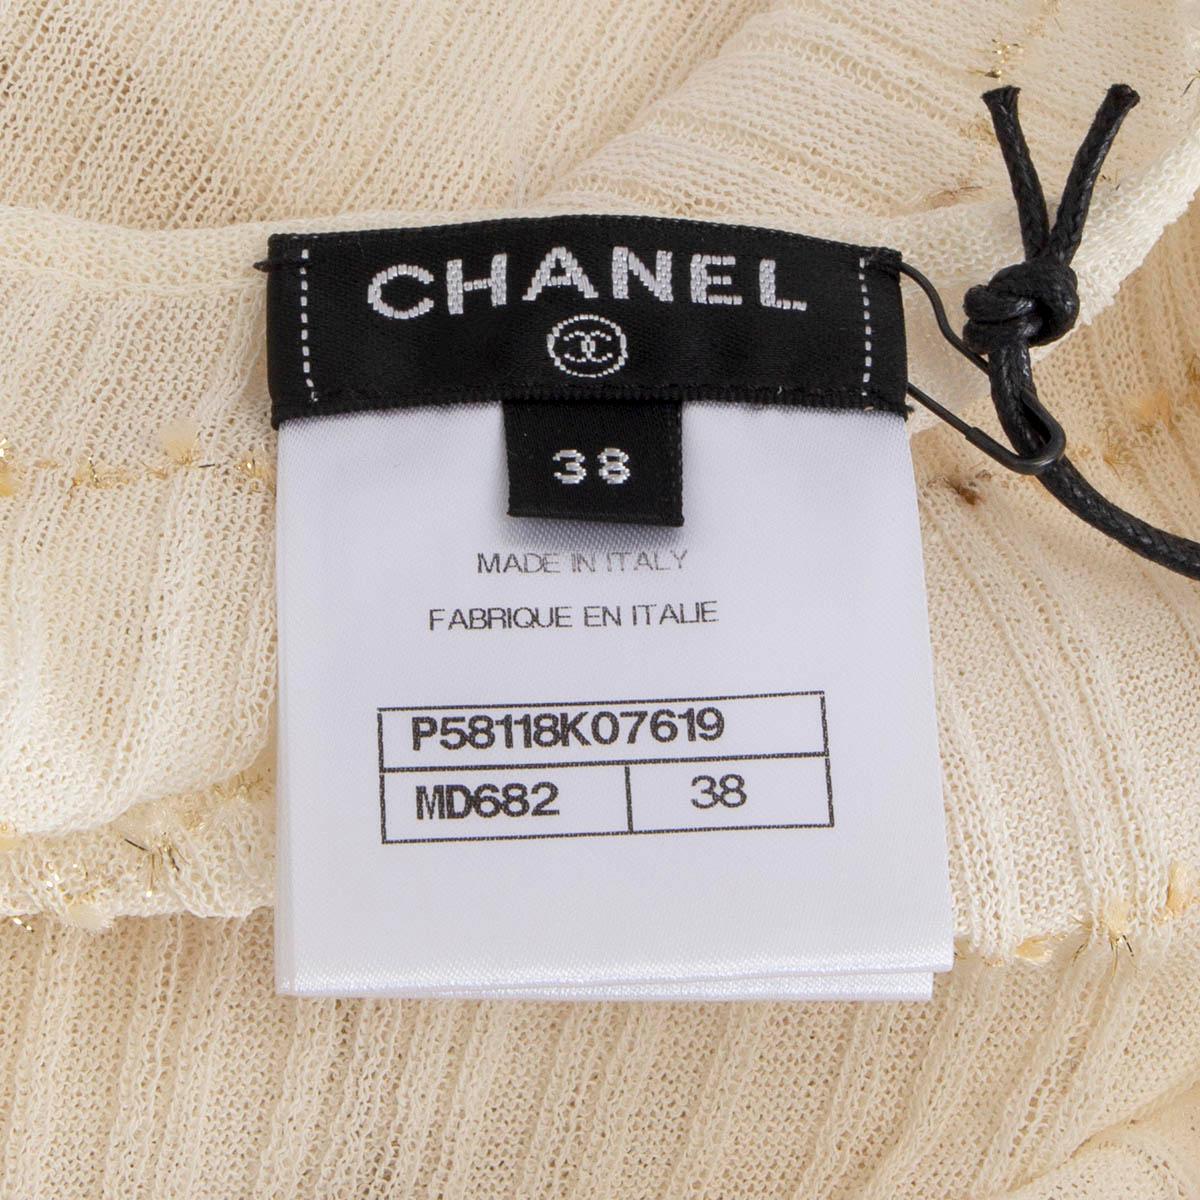 CHANEL ivory & gold 2018 GREECE LUREX SEMI SHEER Top Shirt 38 S For Sale 2